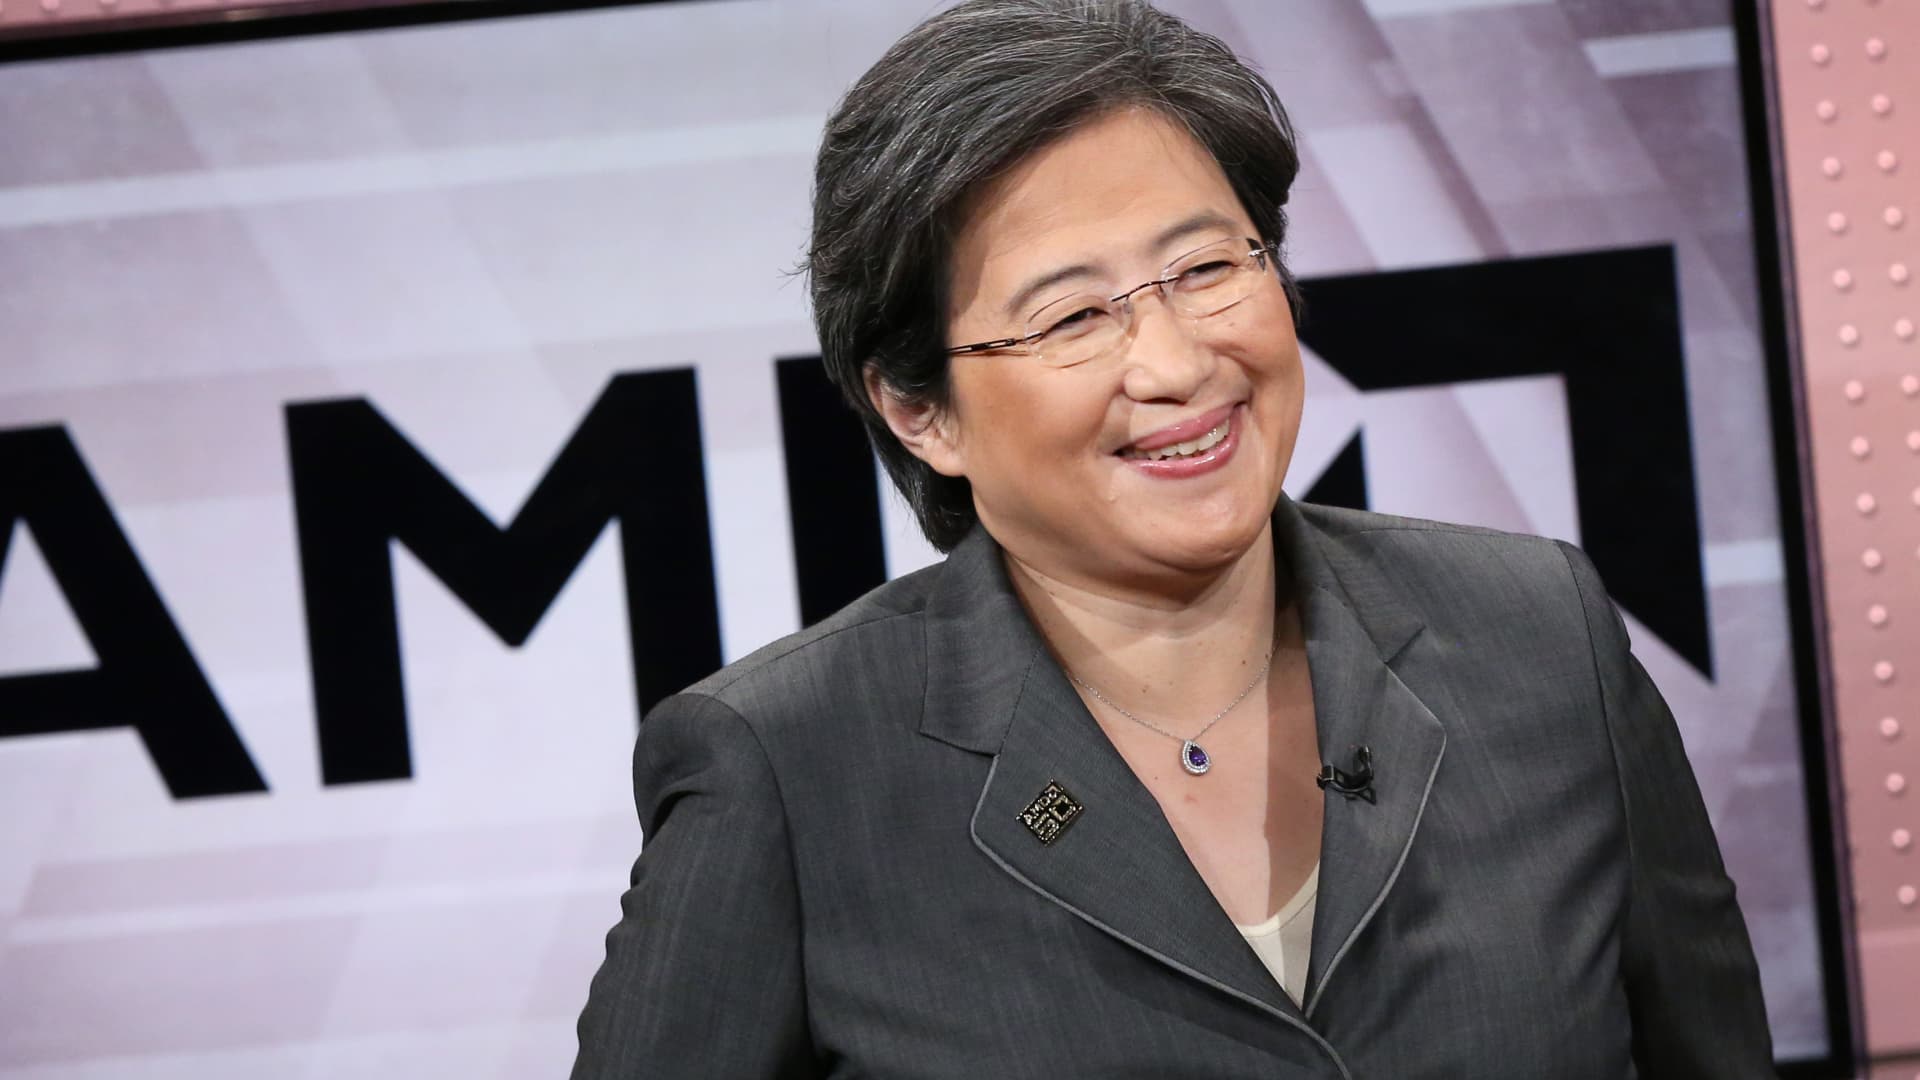 AMD jumps on report Microsoft is collaborating on A.I. chip push